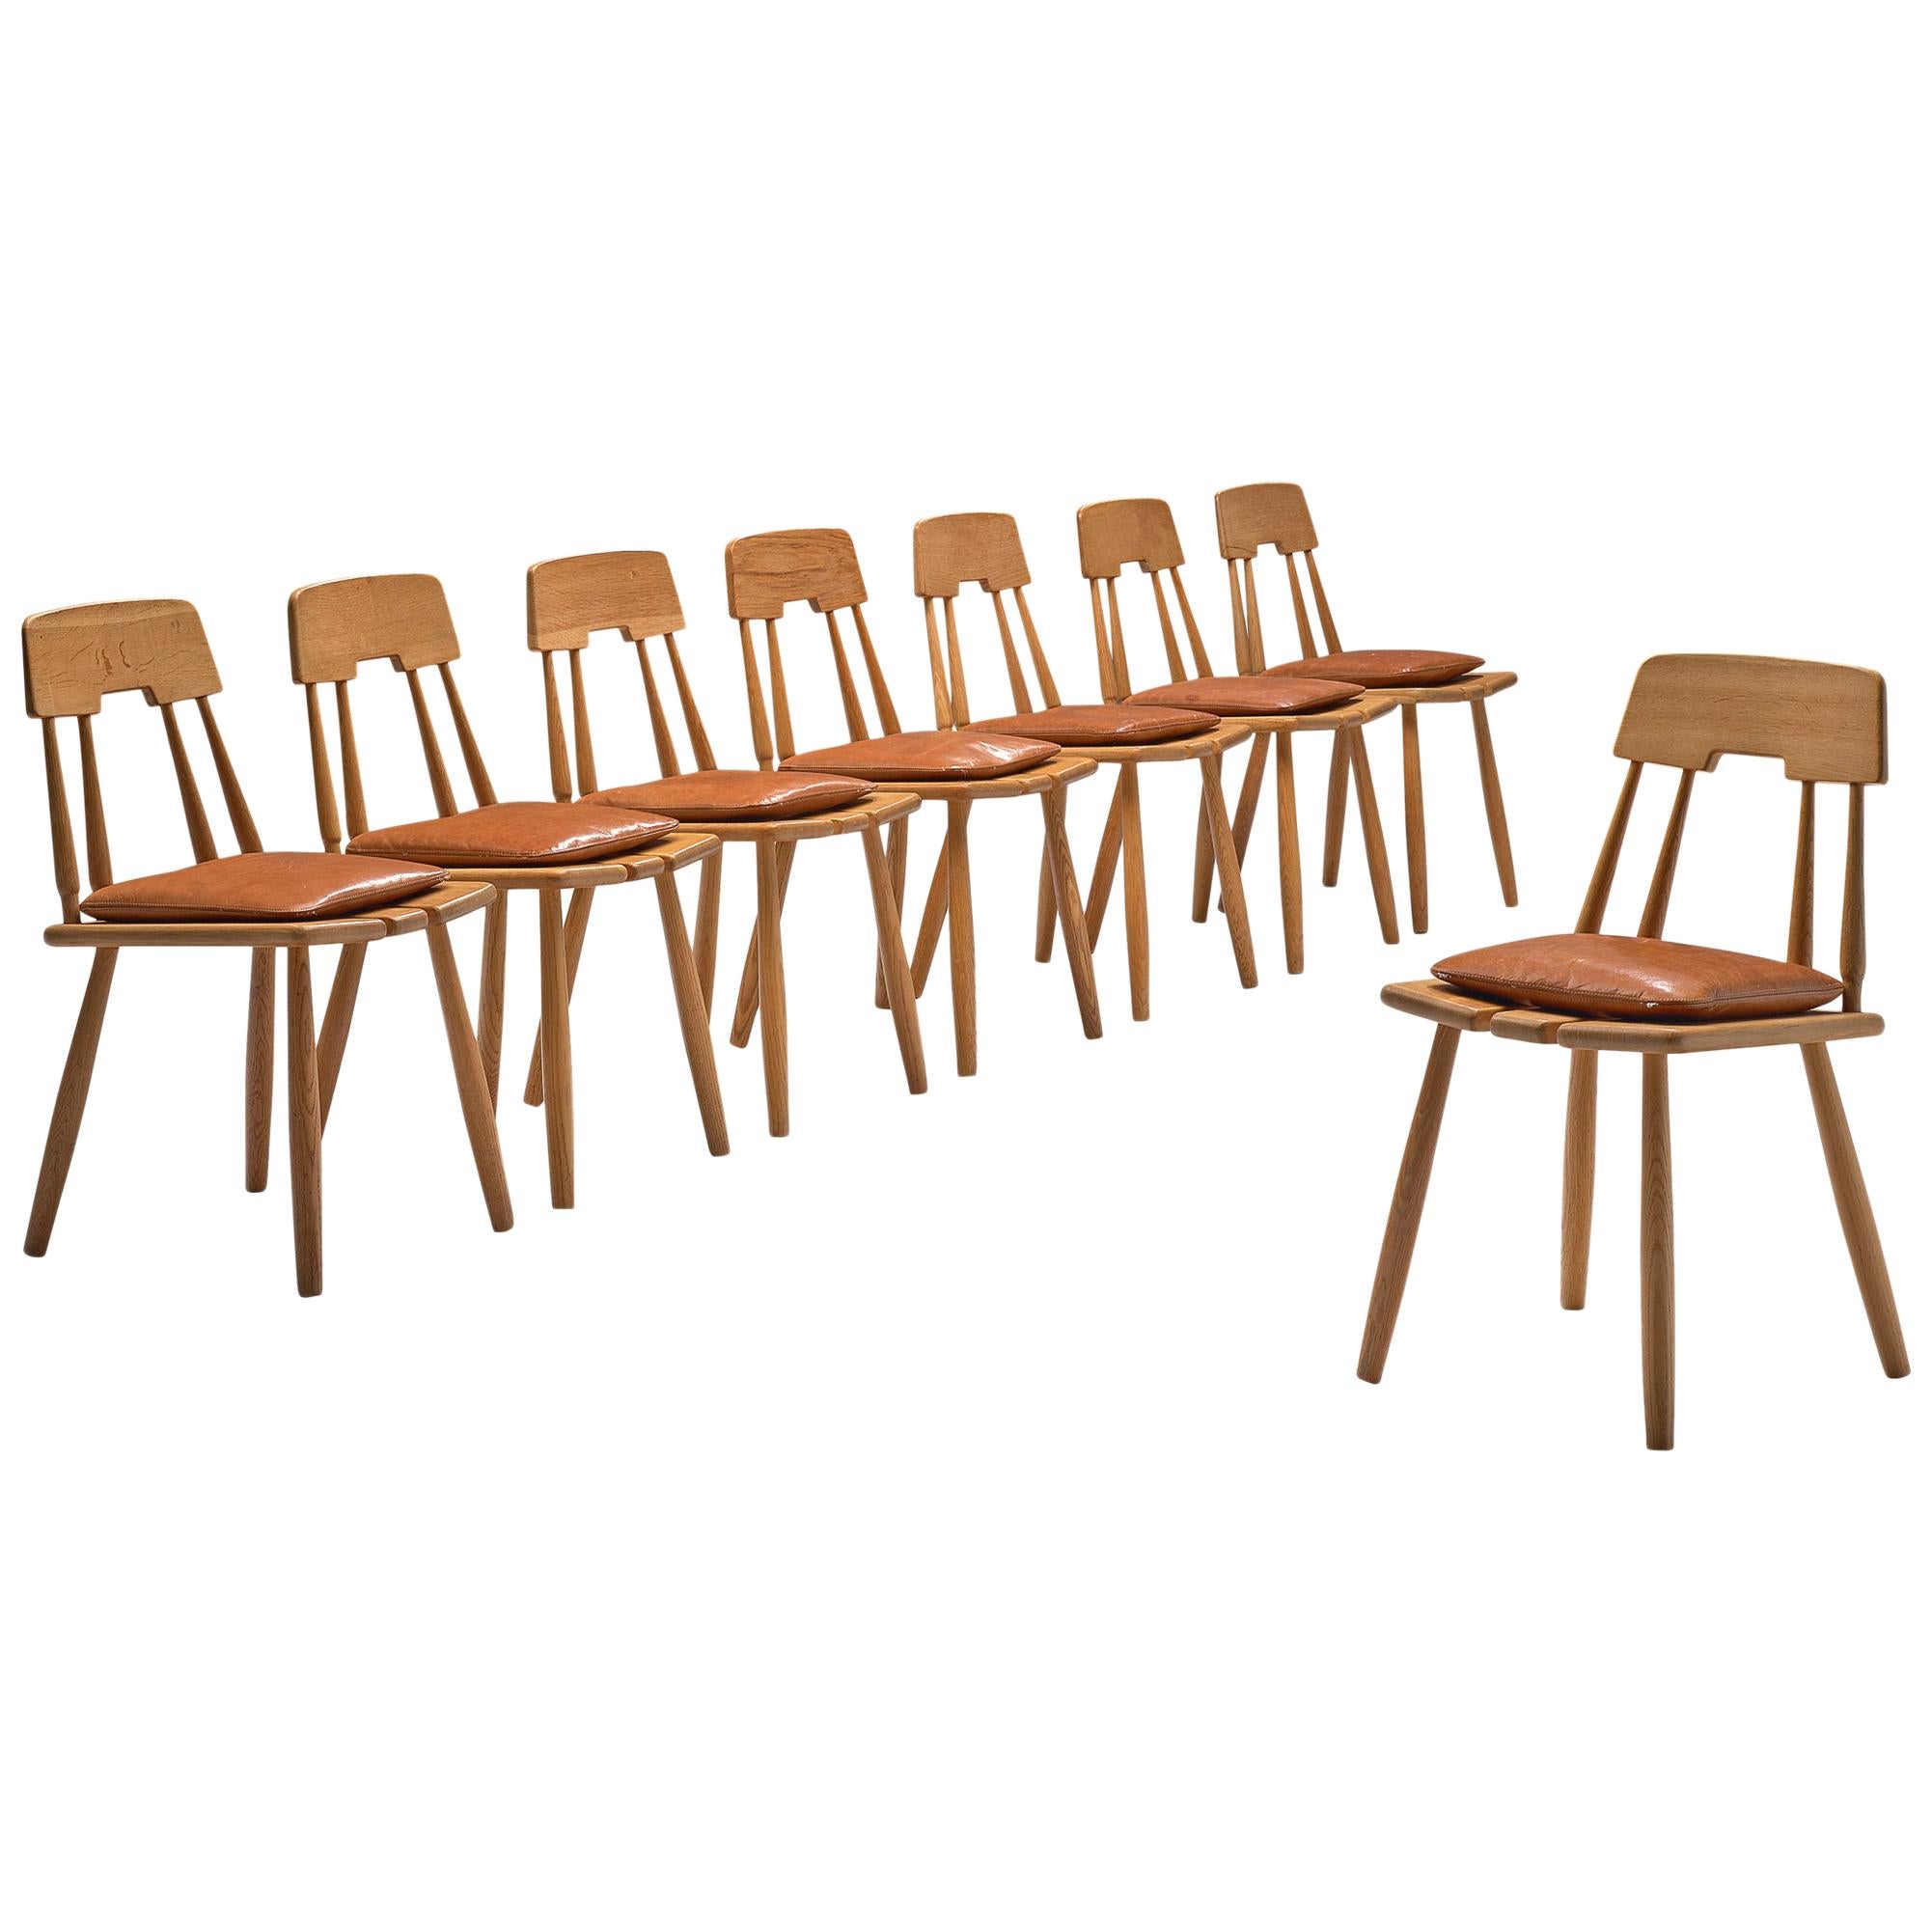 Finnish Dining Chairs in Oak with Leather Cushions